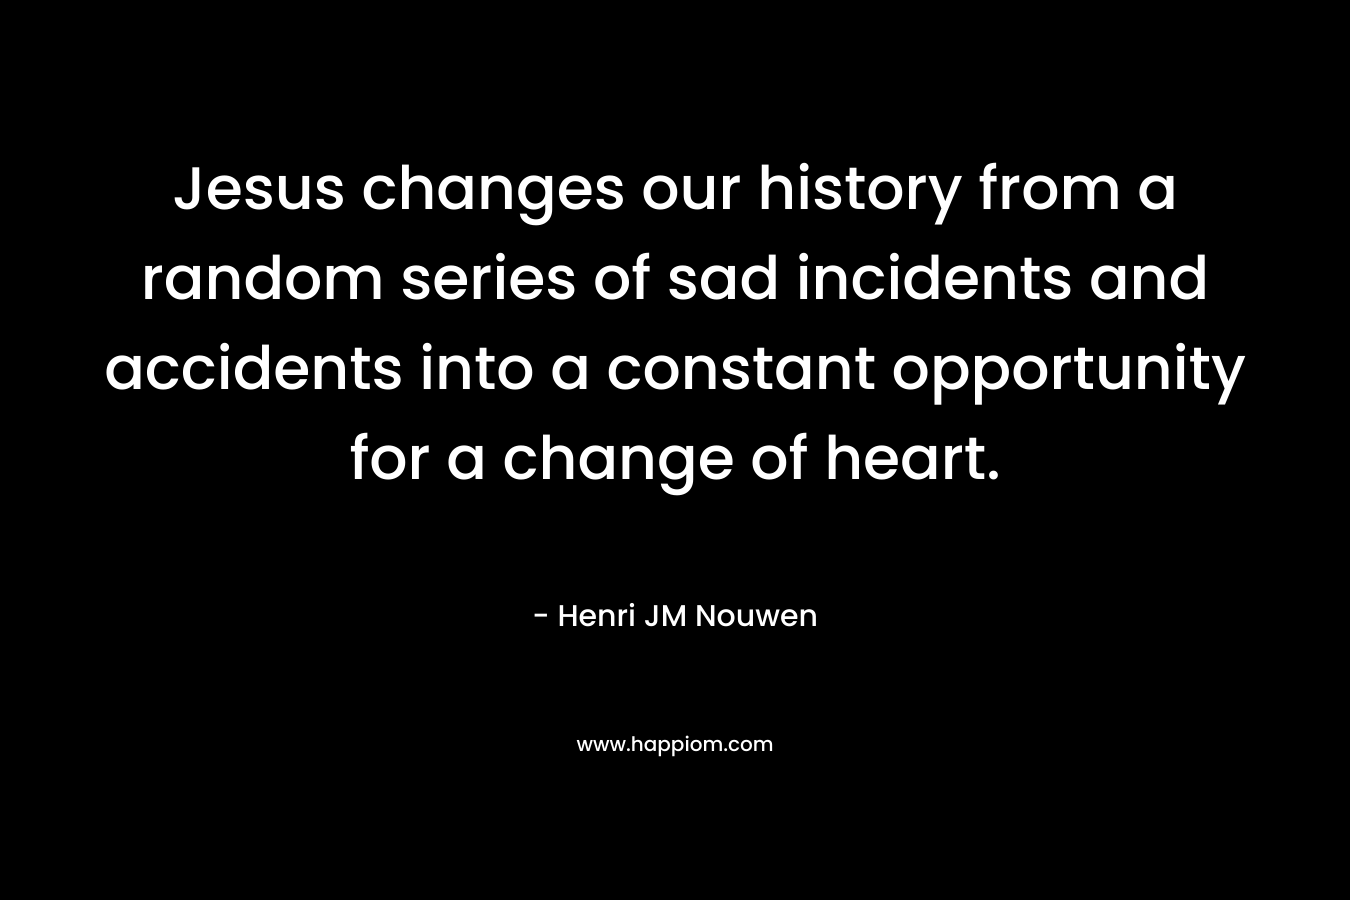 Jesus changes our history from a random series of sad incidents and accidents into a constant opportunity for a change of heart. – Henri JM Nouwen